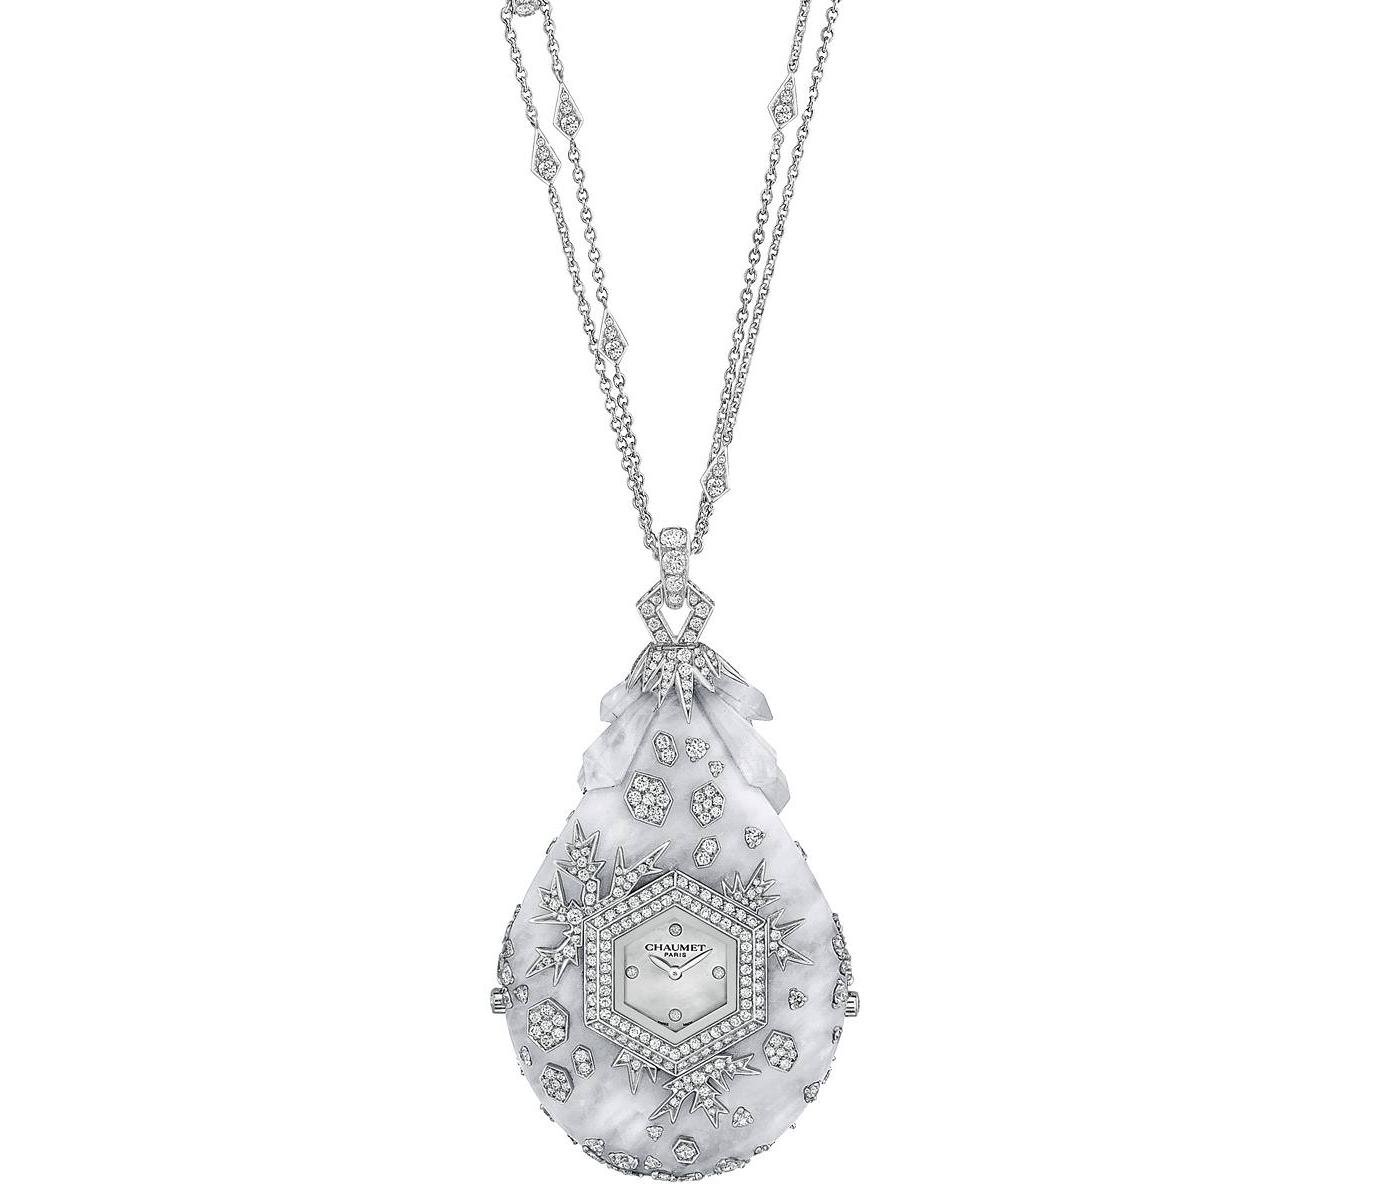 Pendant watch by Chaumet